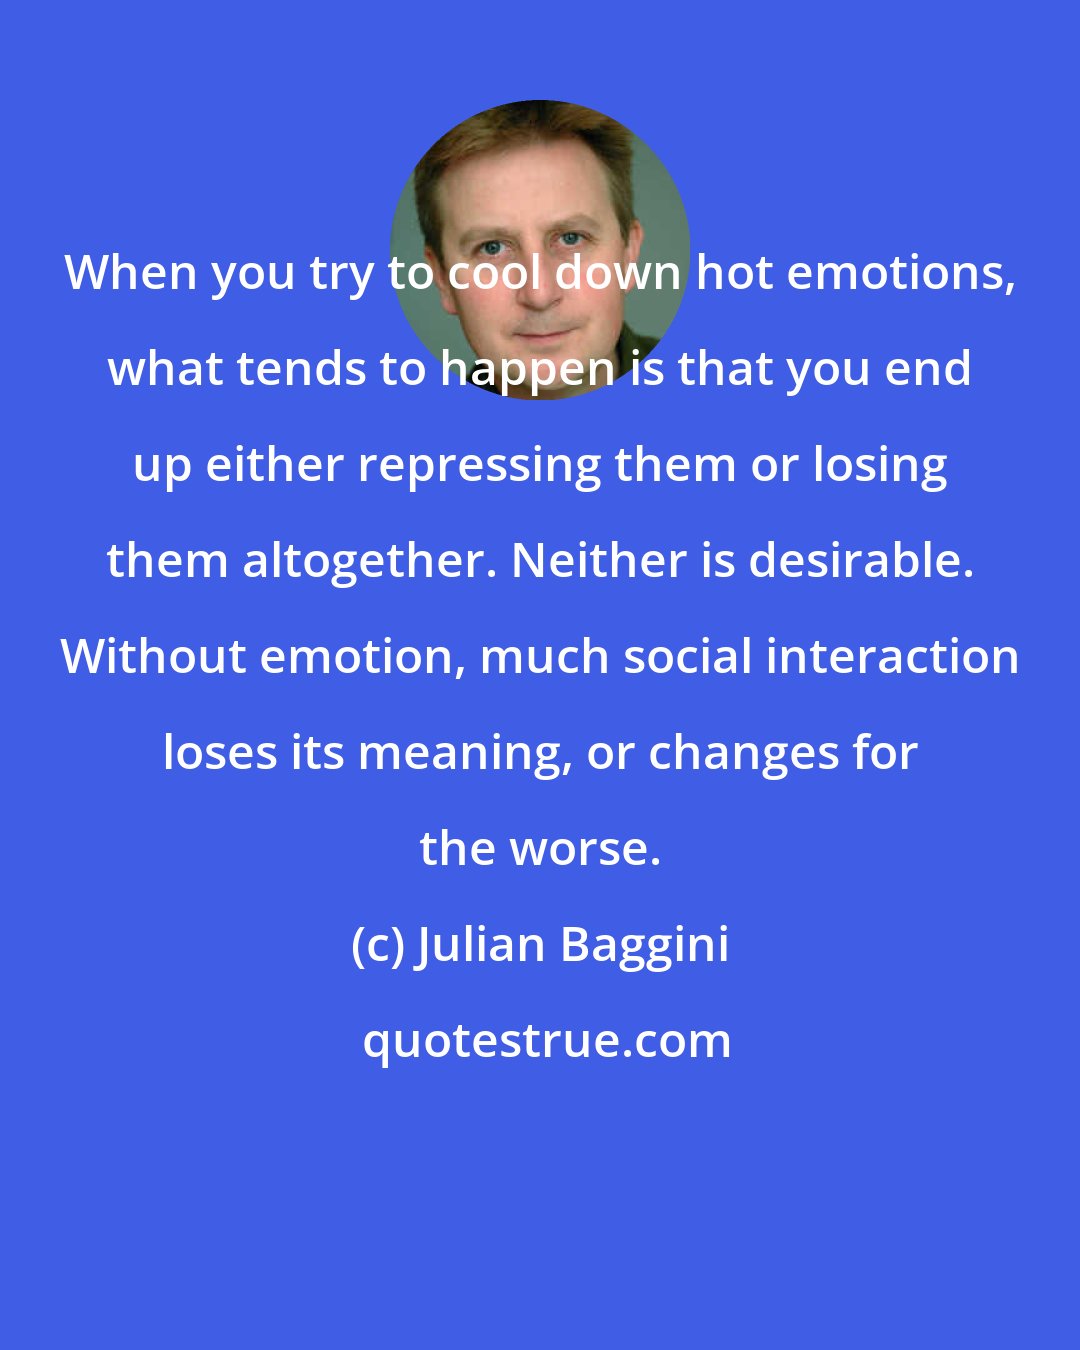 Julian Baggini: When you try to cool down hot emotions, what tends to happen is that you end up either repressing them or losing them altogether. Neither is desirable. Without emotion, much social interaction loses its meaning, or changes for the worse.